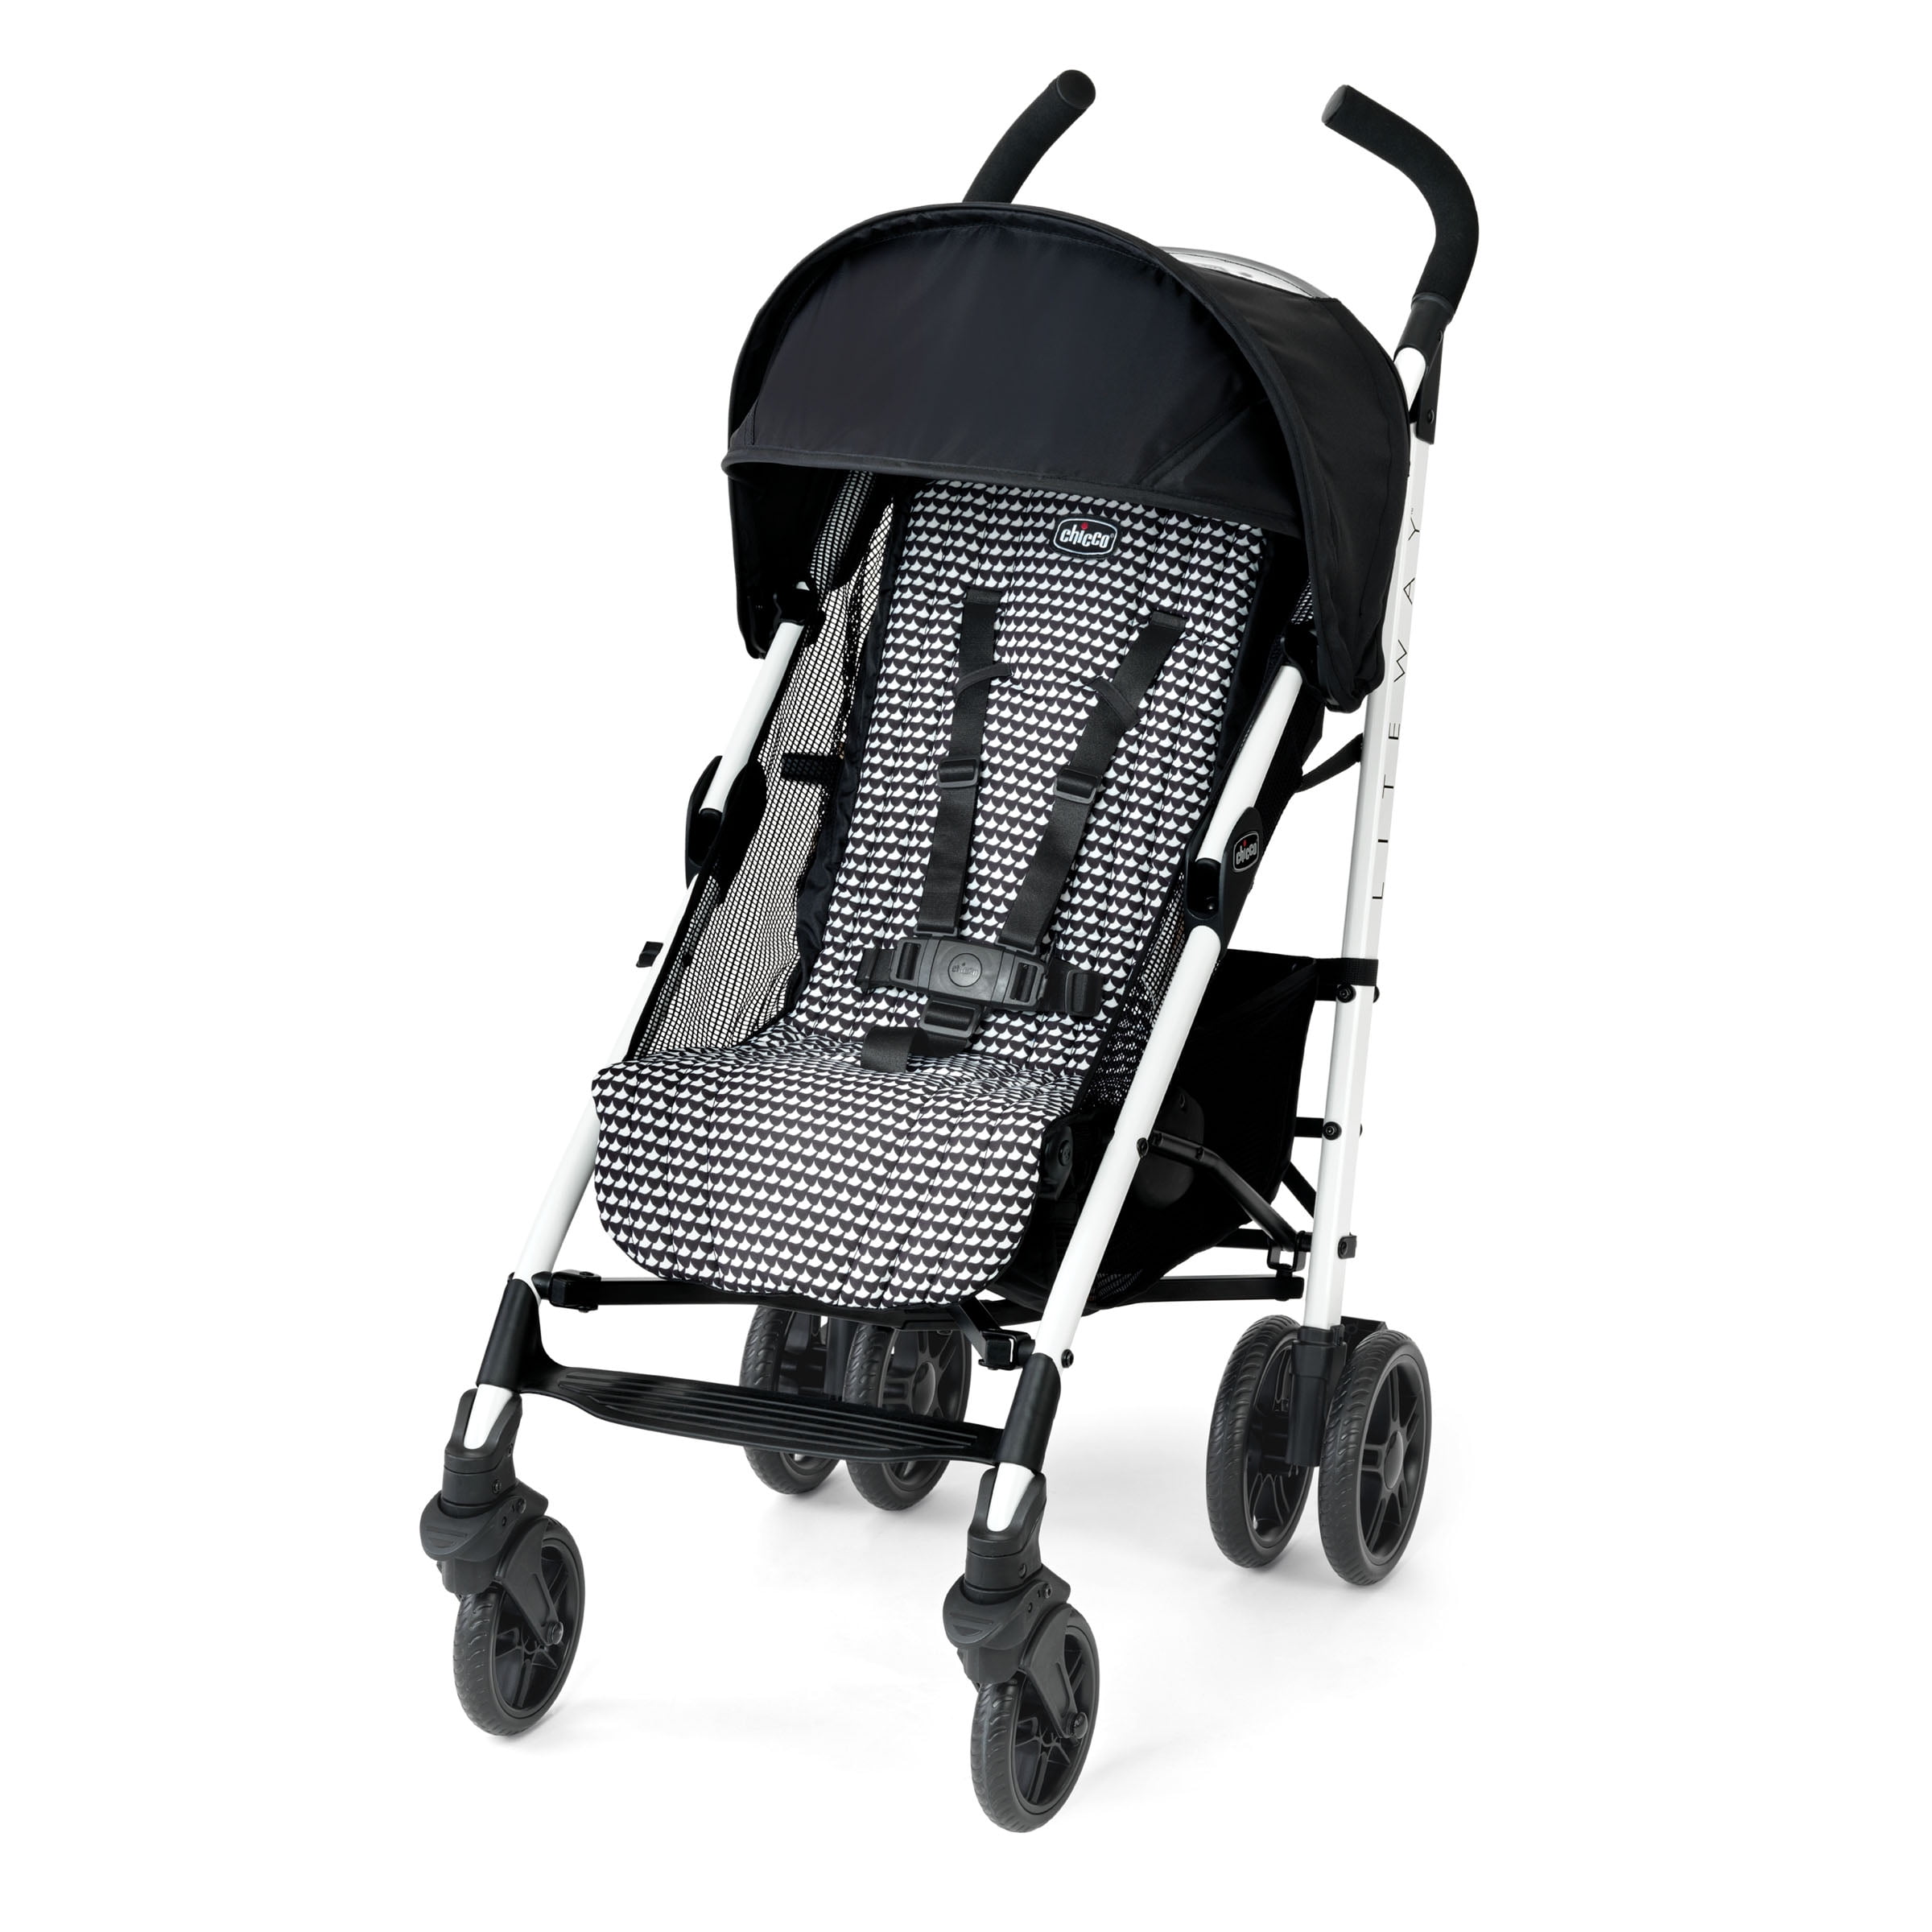 Chicco Liteway Lightweight Stroller - - Cosmo (Black/White) Cosmo